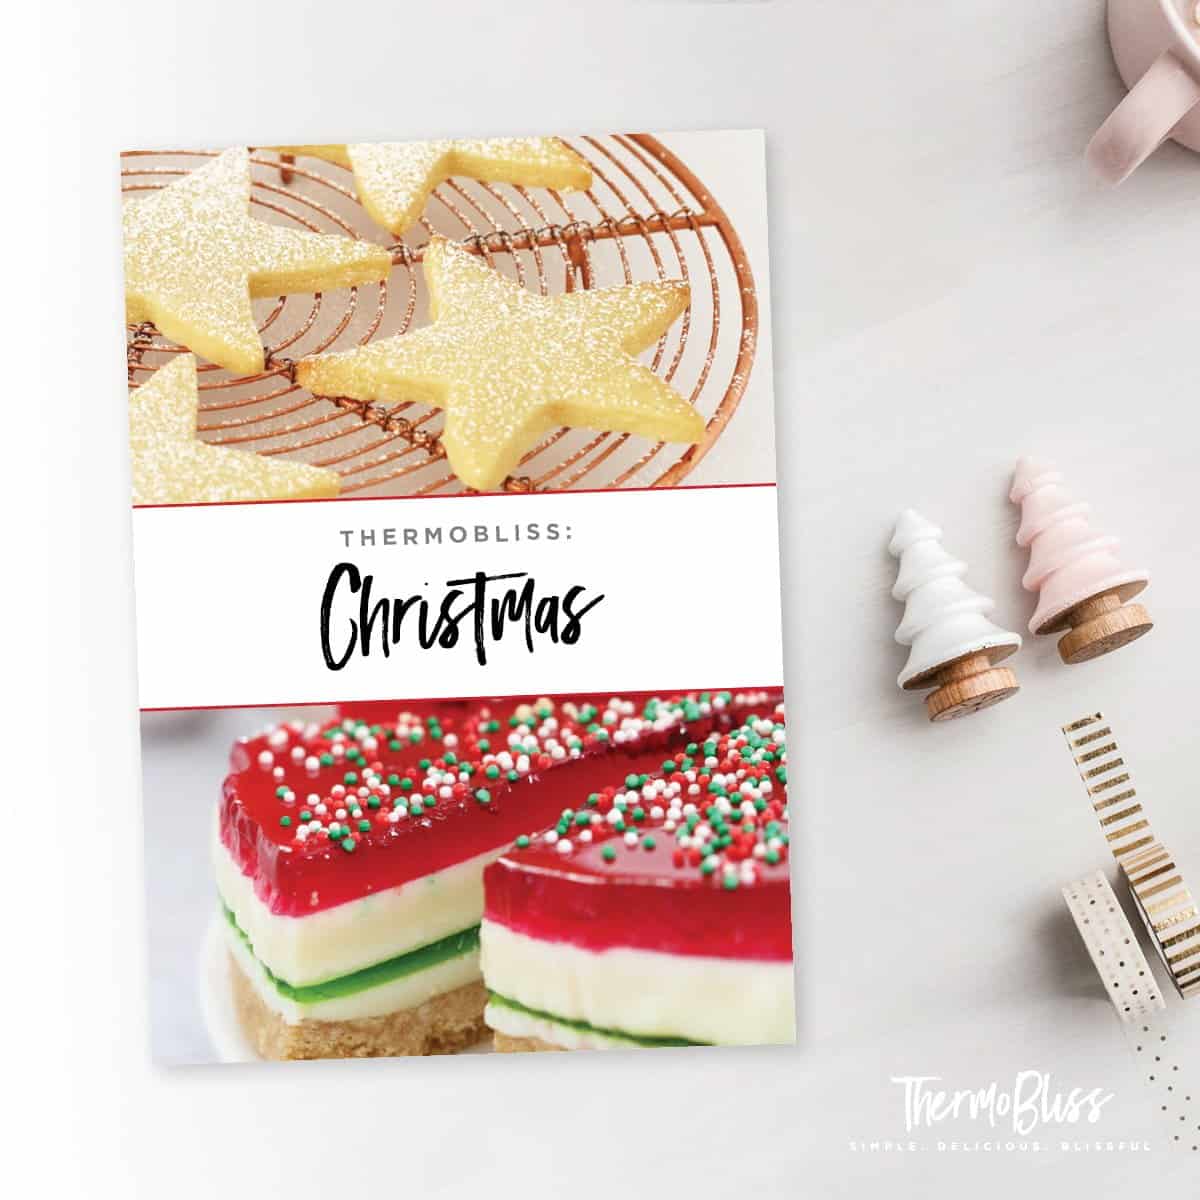 The cover of a recipe book - Thermobliss Christmas